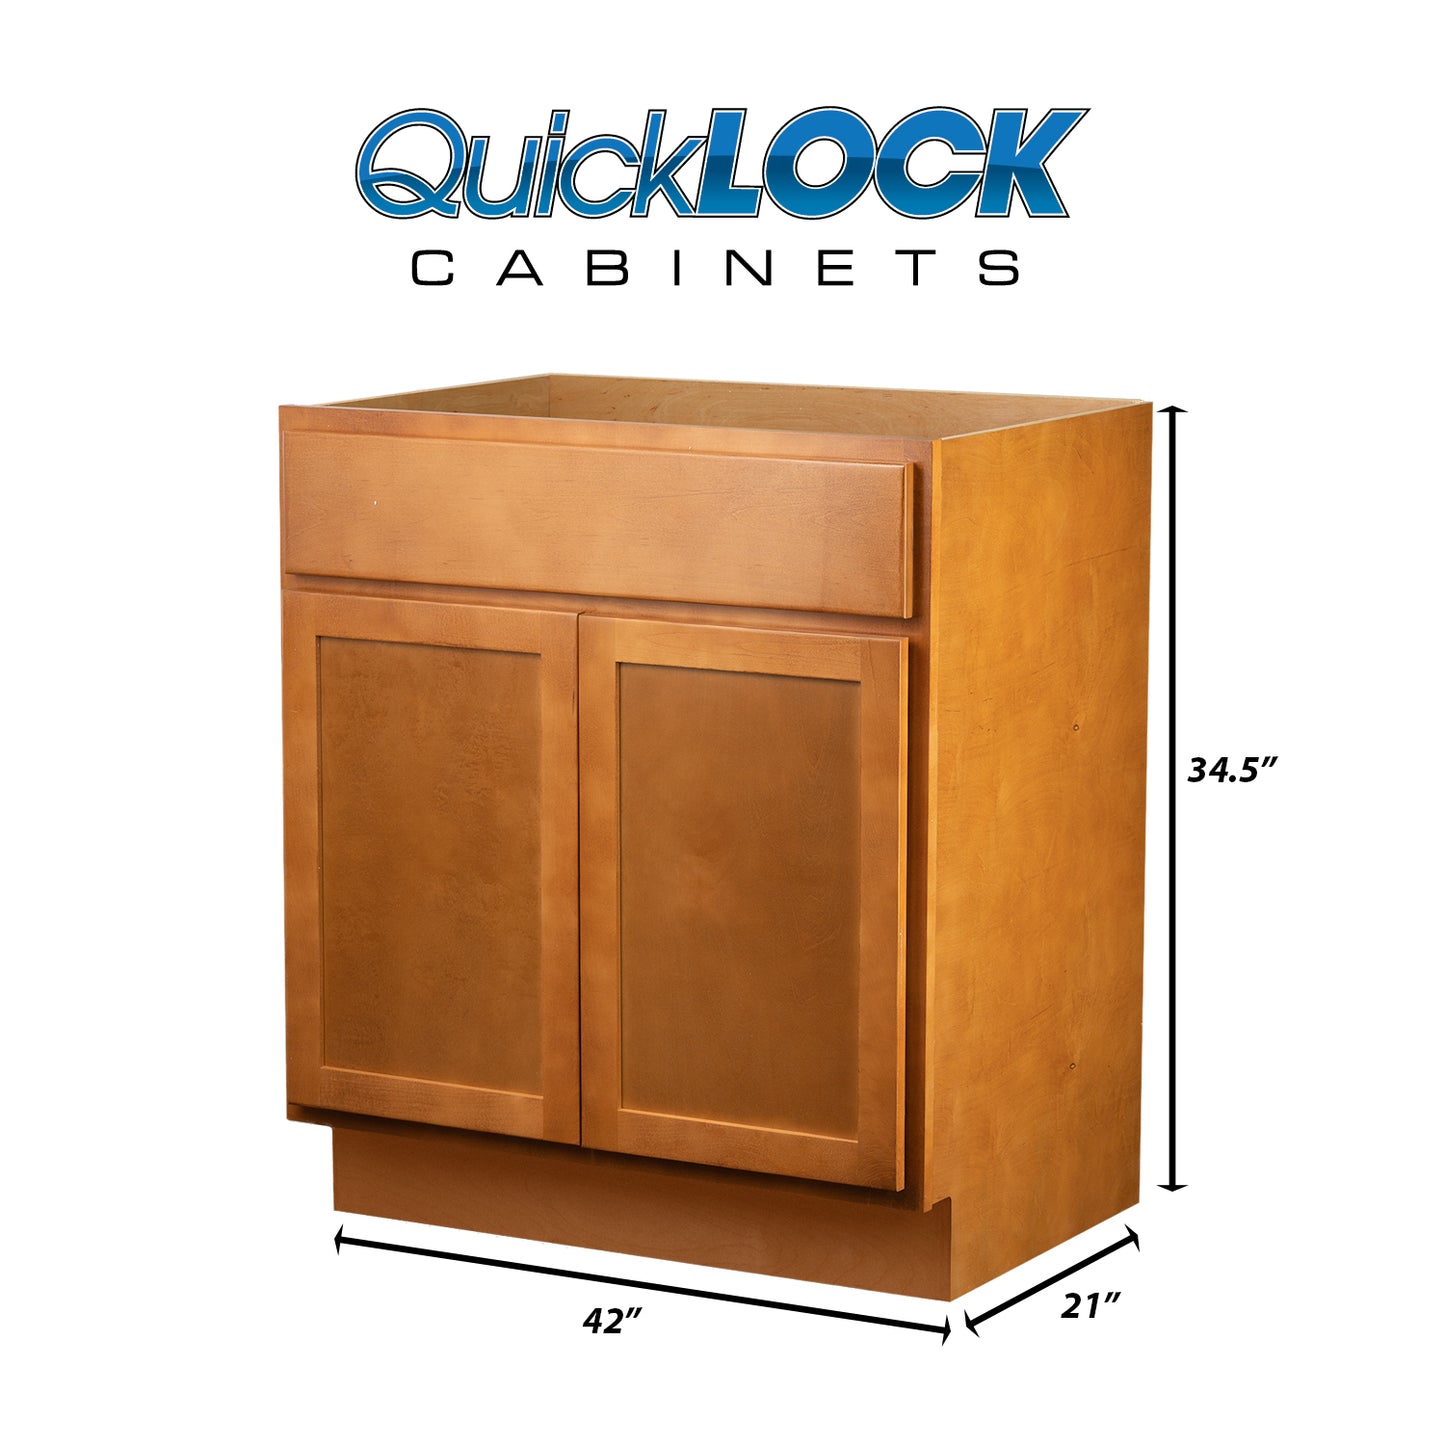 Quicklock RTA (Ready-to-Assemble) Provincial Stain Vanity Base Cabinet | 42"Wx34.5"Hx21"D